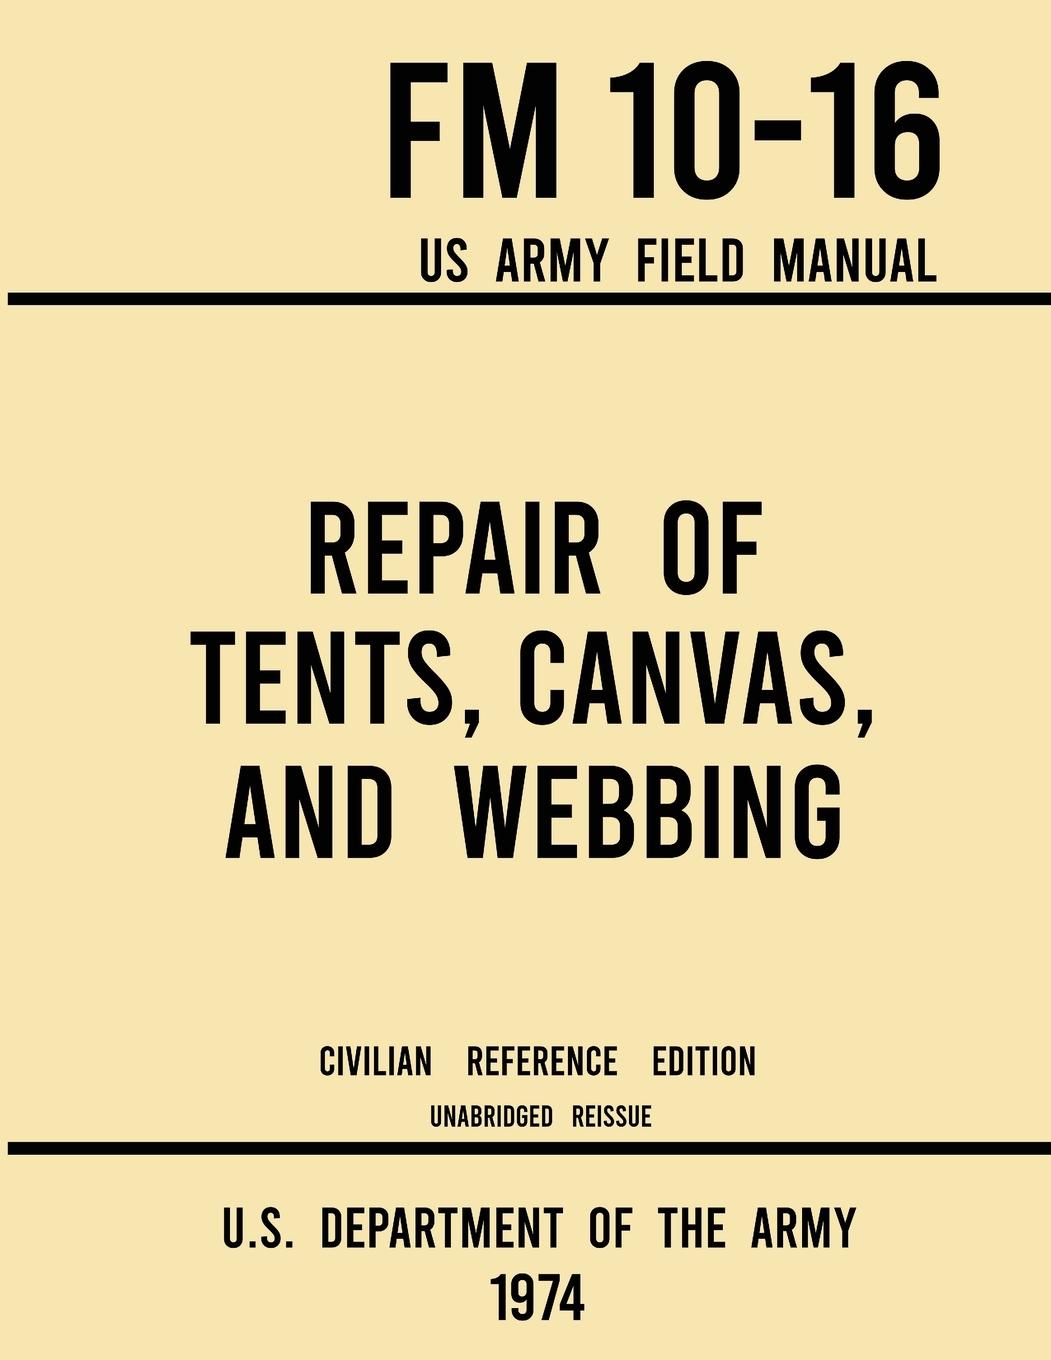 Книга Repair of Tents, Canvas, and Webbing - FM 10-16 US Army Field Manual (1974 Civilian Reference Edition) 